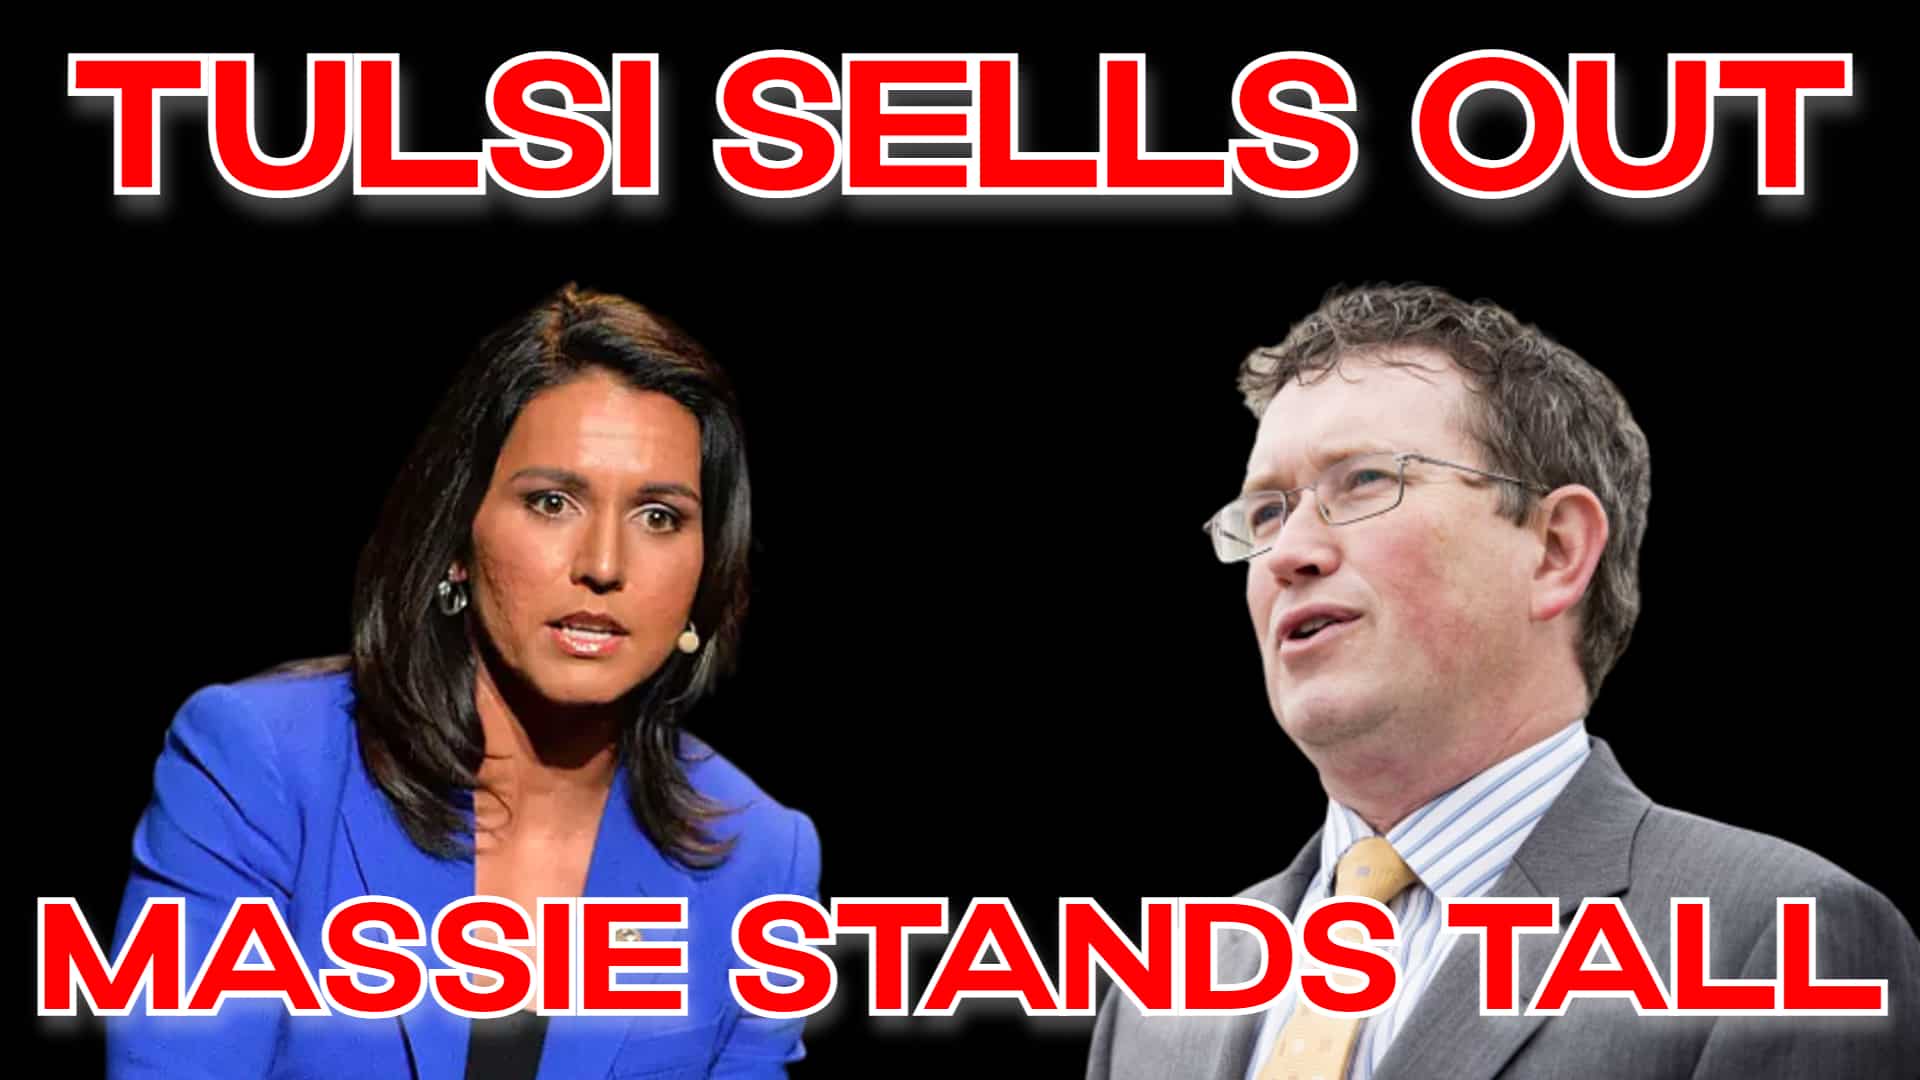 COI #169: Tulsi Shills for the War Party, While Thomas Massie Makes a Heroic Stand